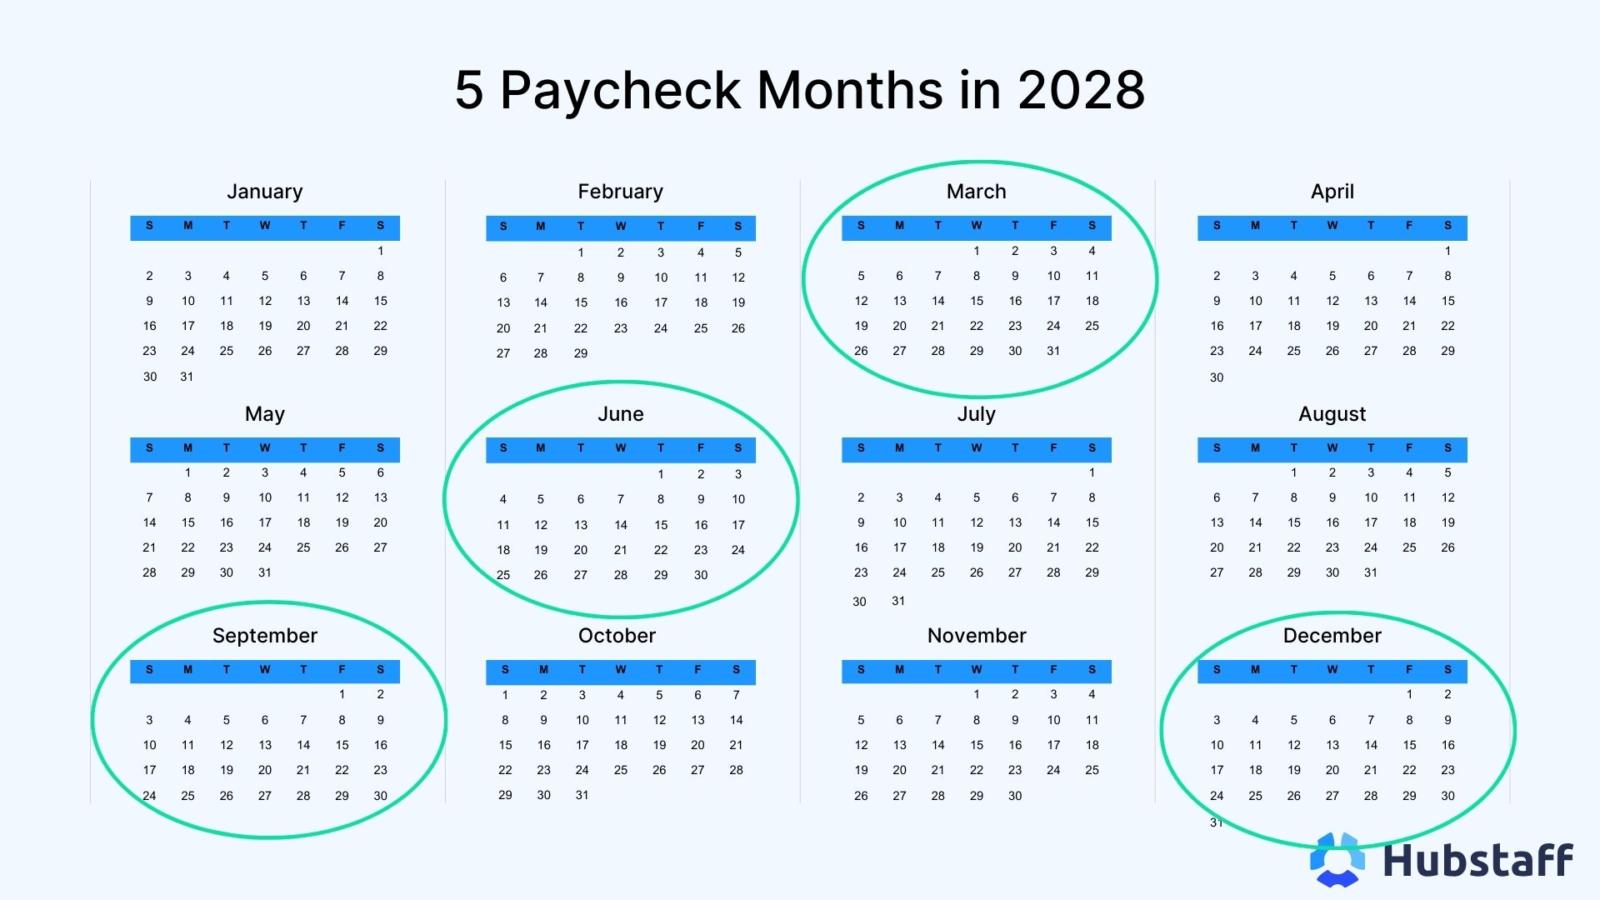 Five paycheck months in 2028